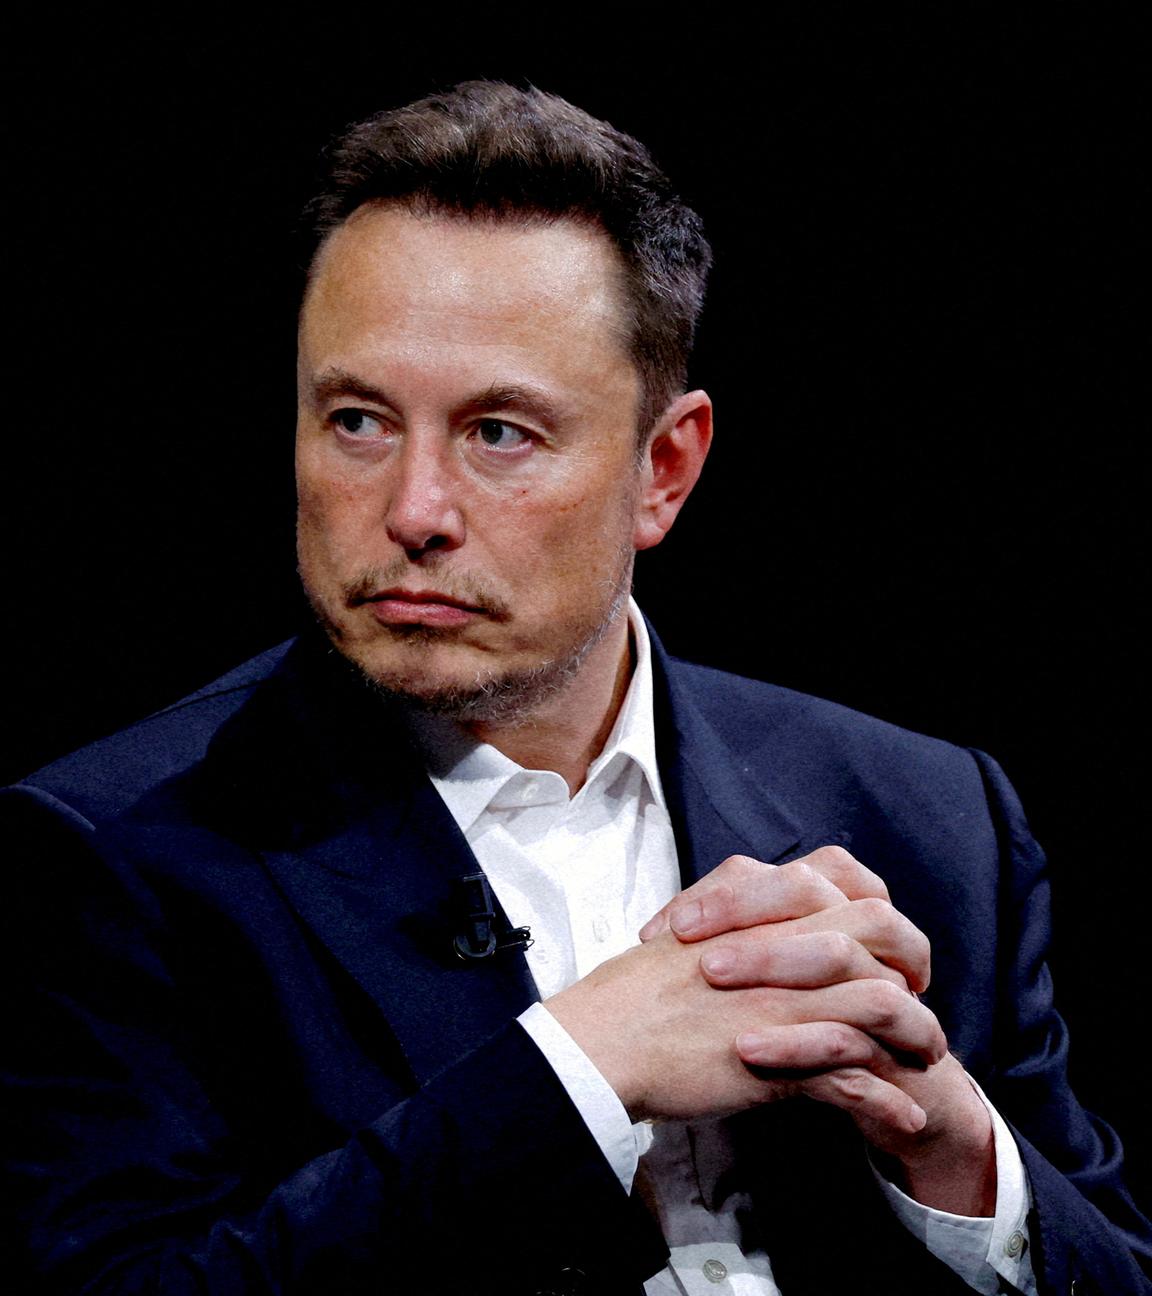 Elon Musk, CEO of SpaceX and Tesla and owner of X, formerly known as Twitter, attends the Viva Technology conference dedicated to innovation and startups at the Porte de Versailles exhibition centre in Paris, France, June 16, 2023.